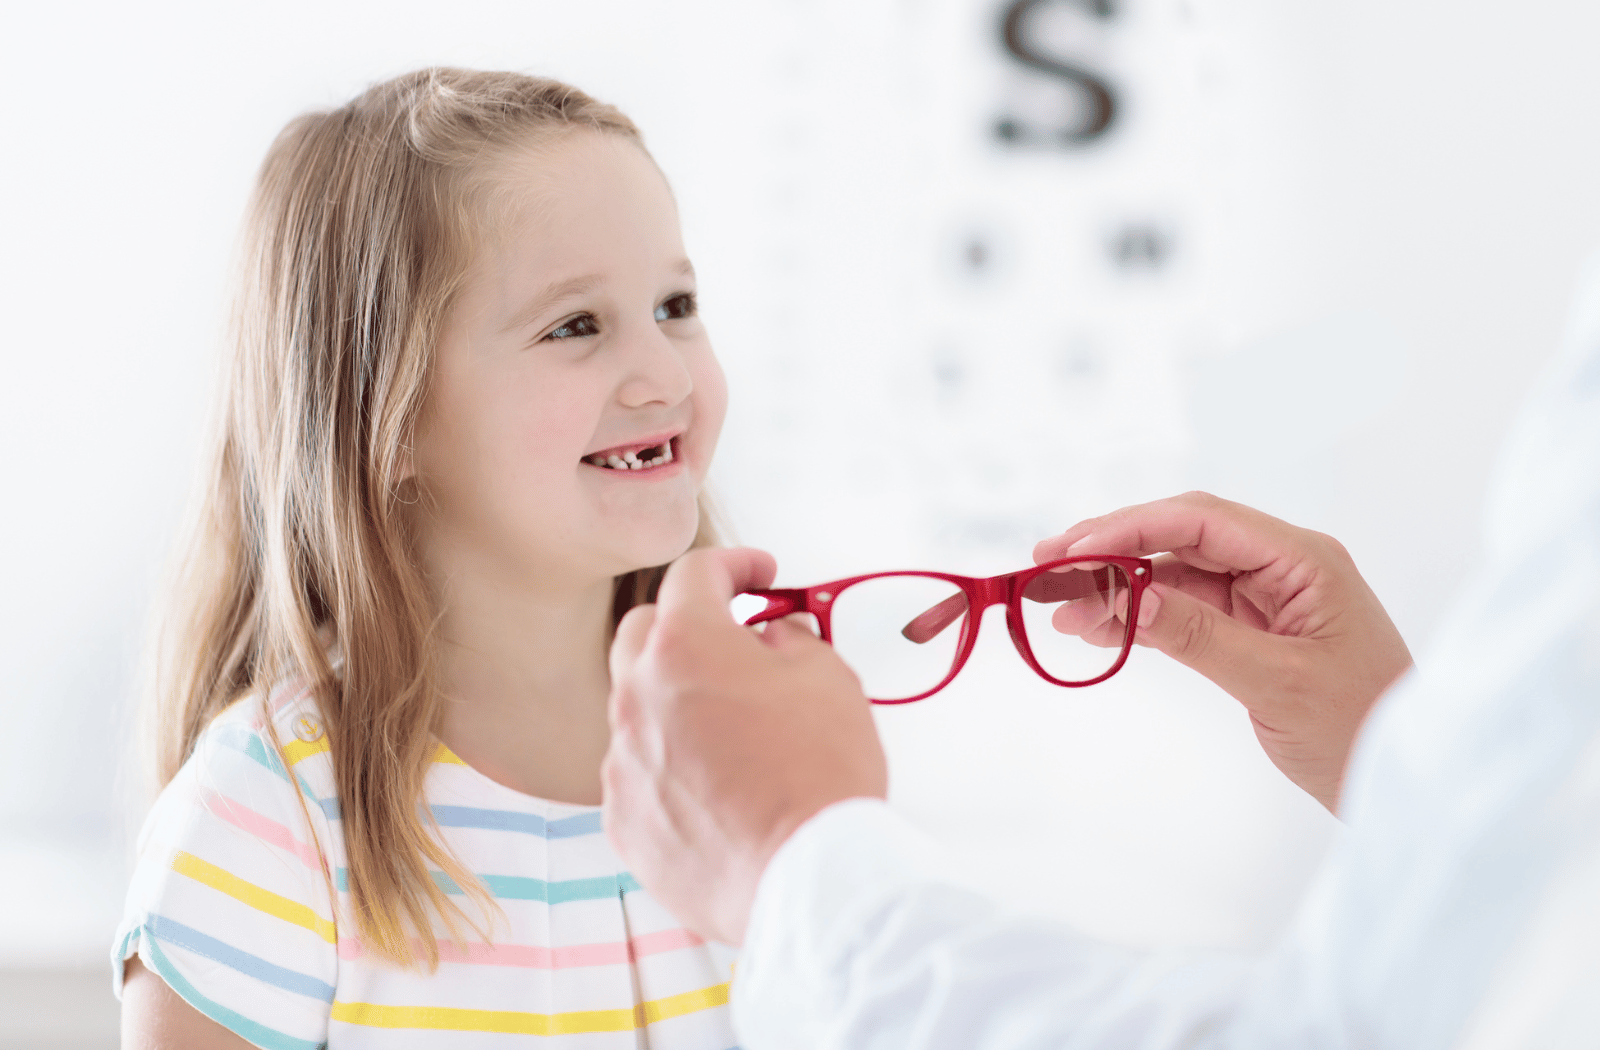 A young girl gets her new glasses fitted for her face at the optometrist's office